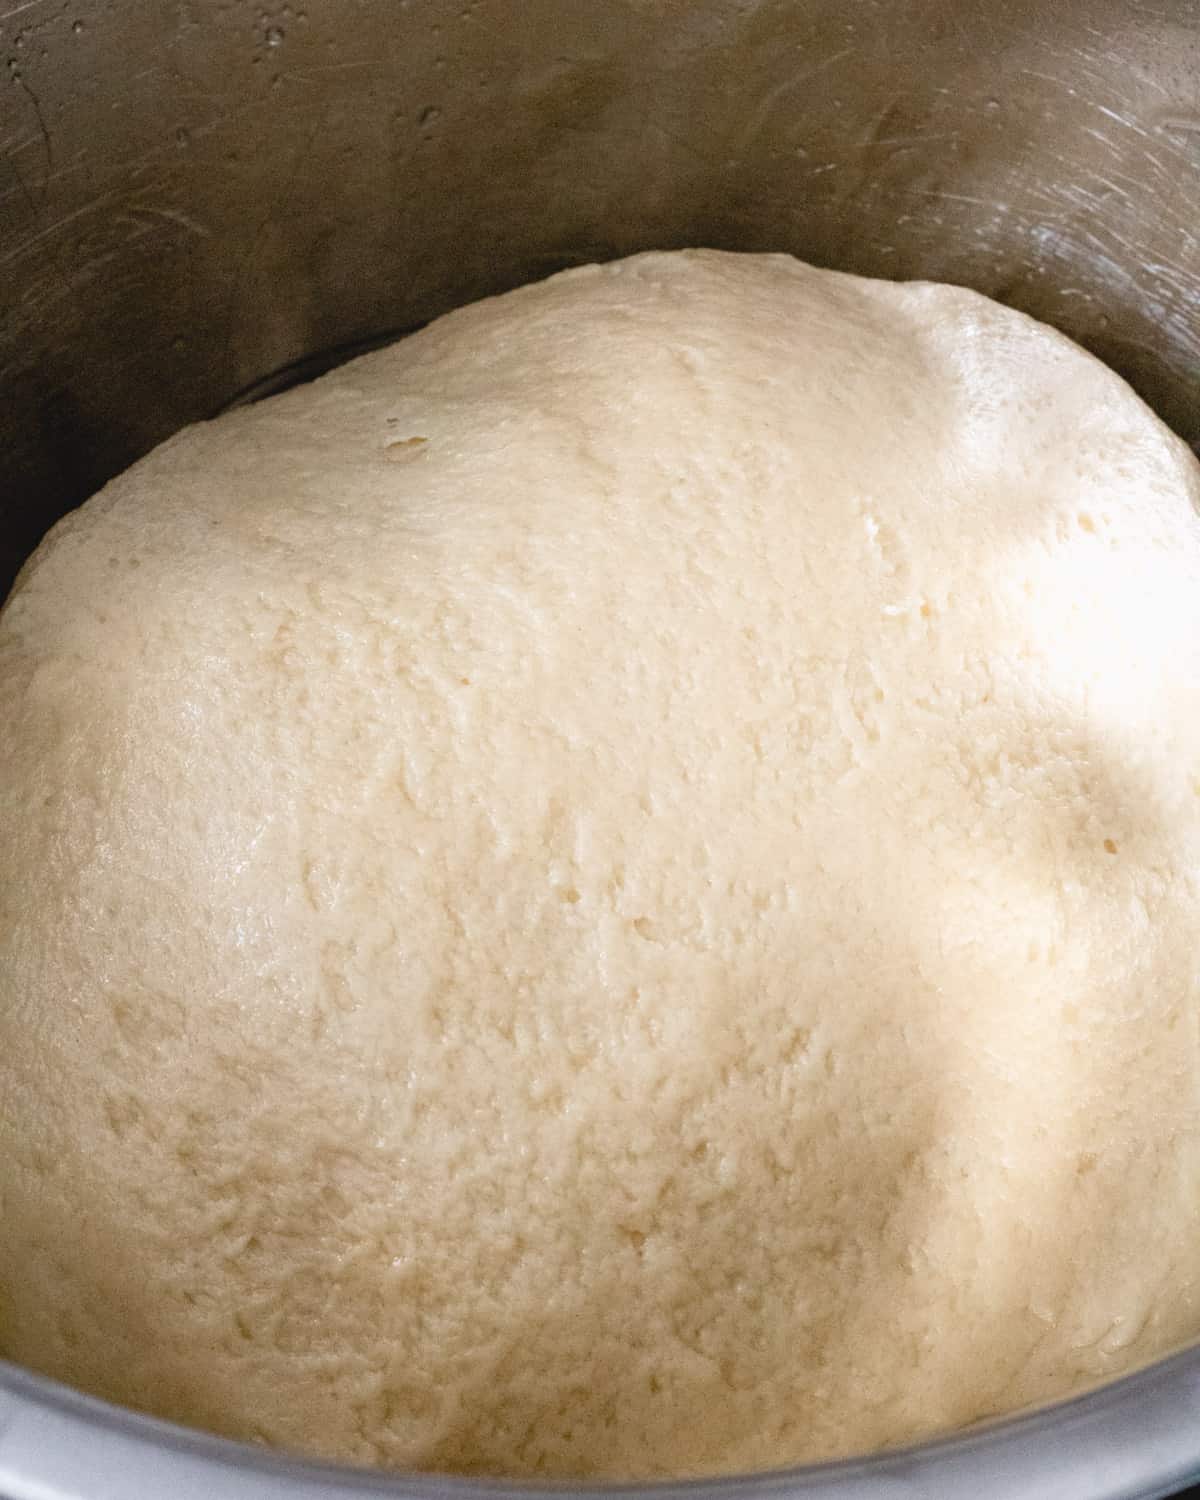 Soft dough that is ready to rise.